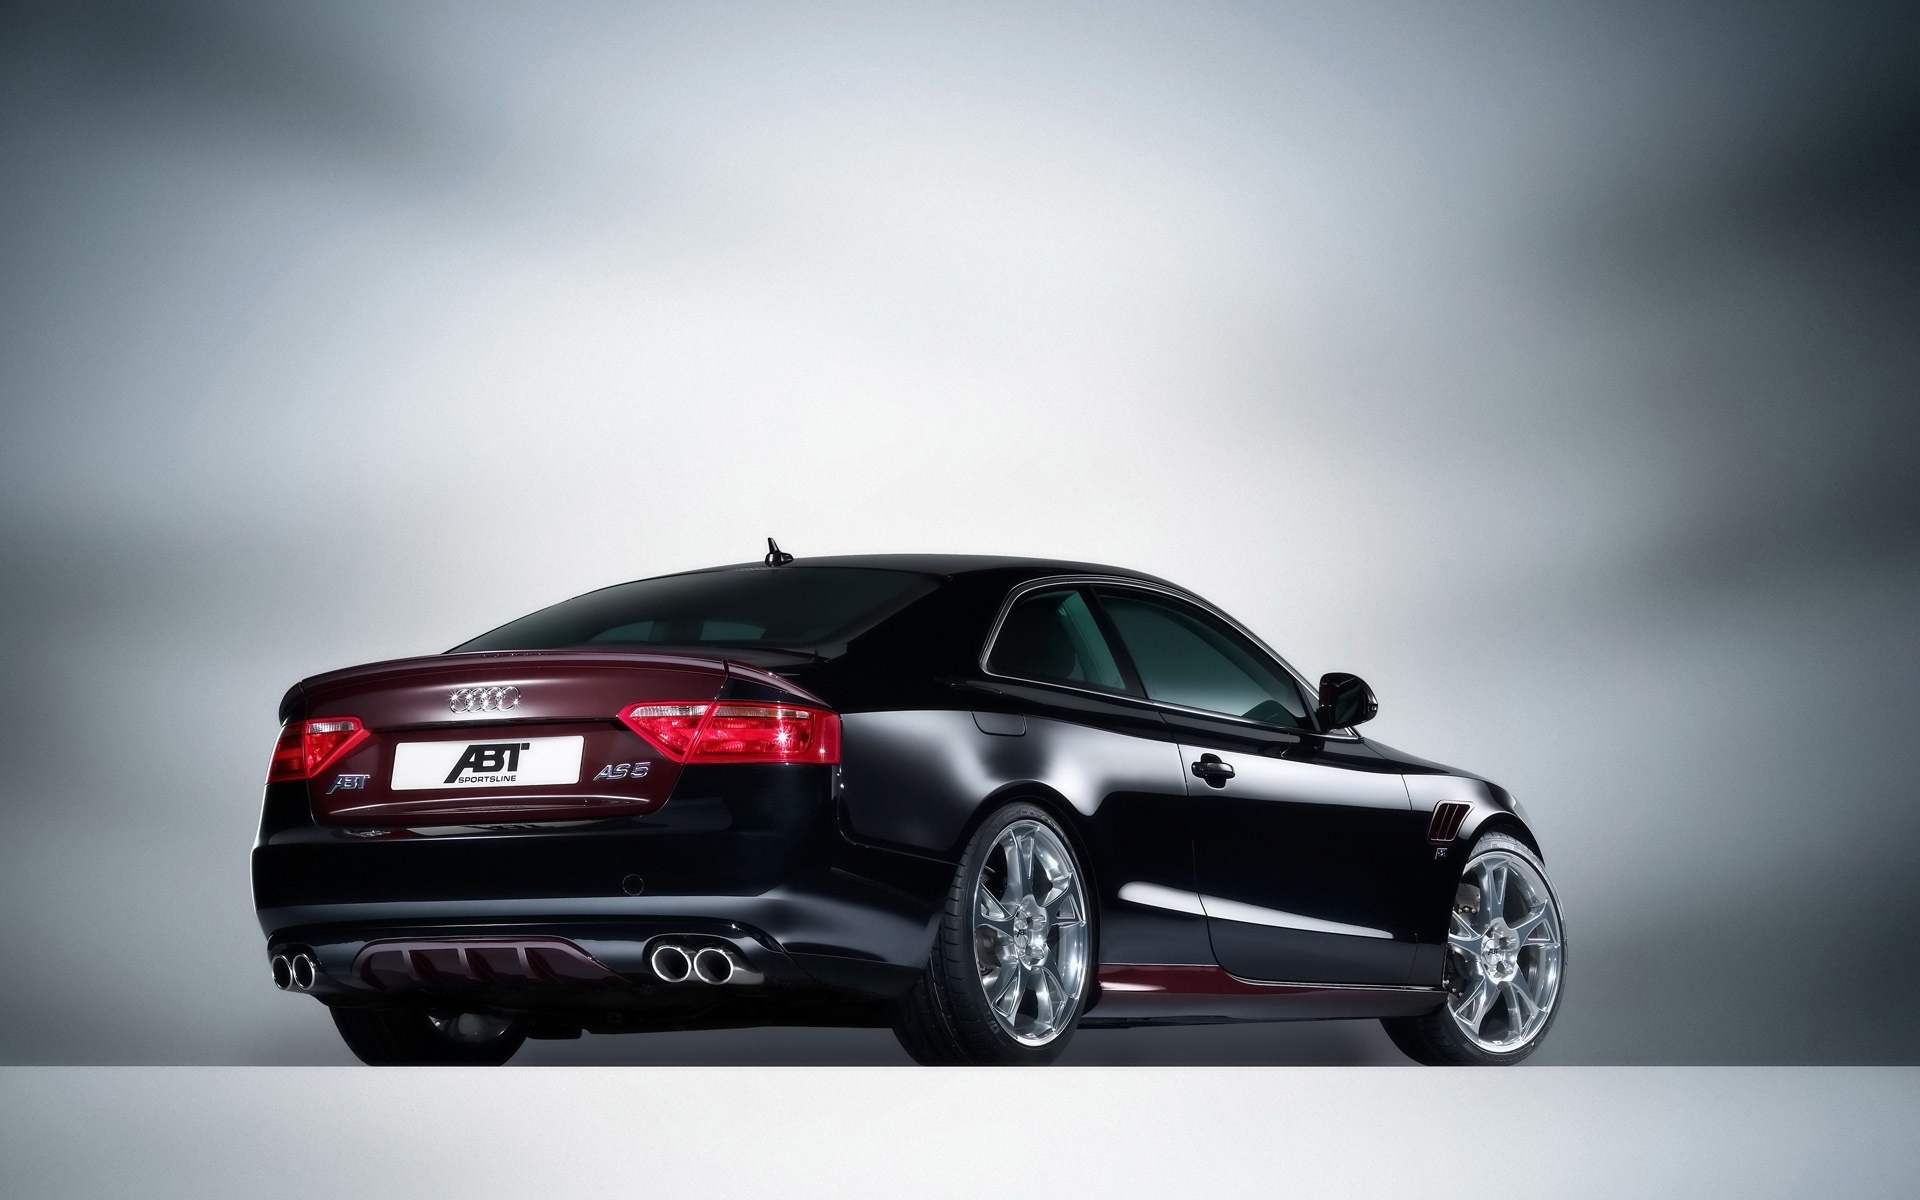 2008 Abt Audi AS5 - Rear Angle for 1920 x 1200 widescreen resolution